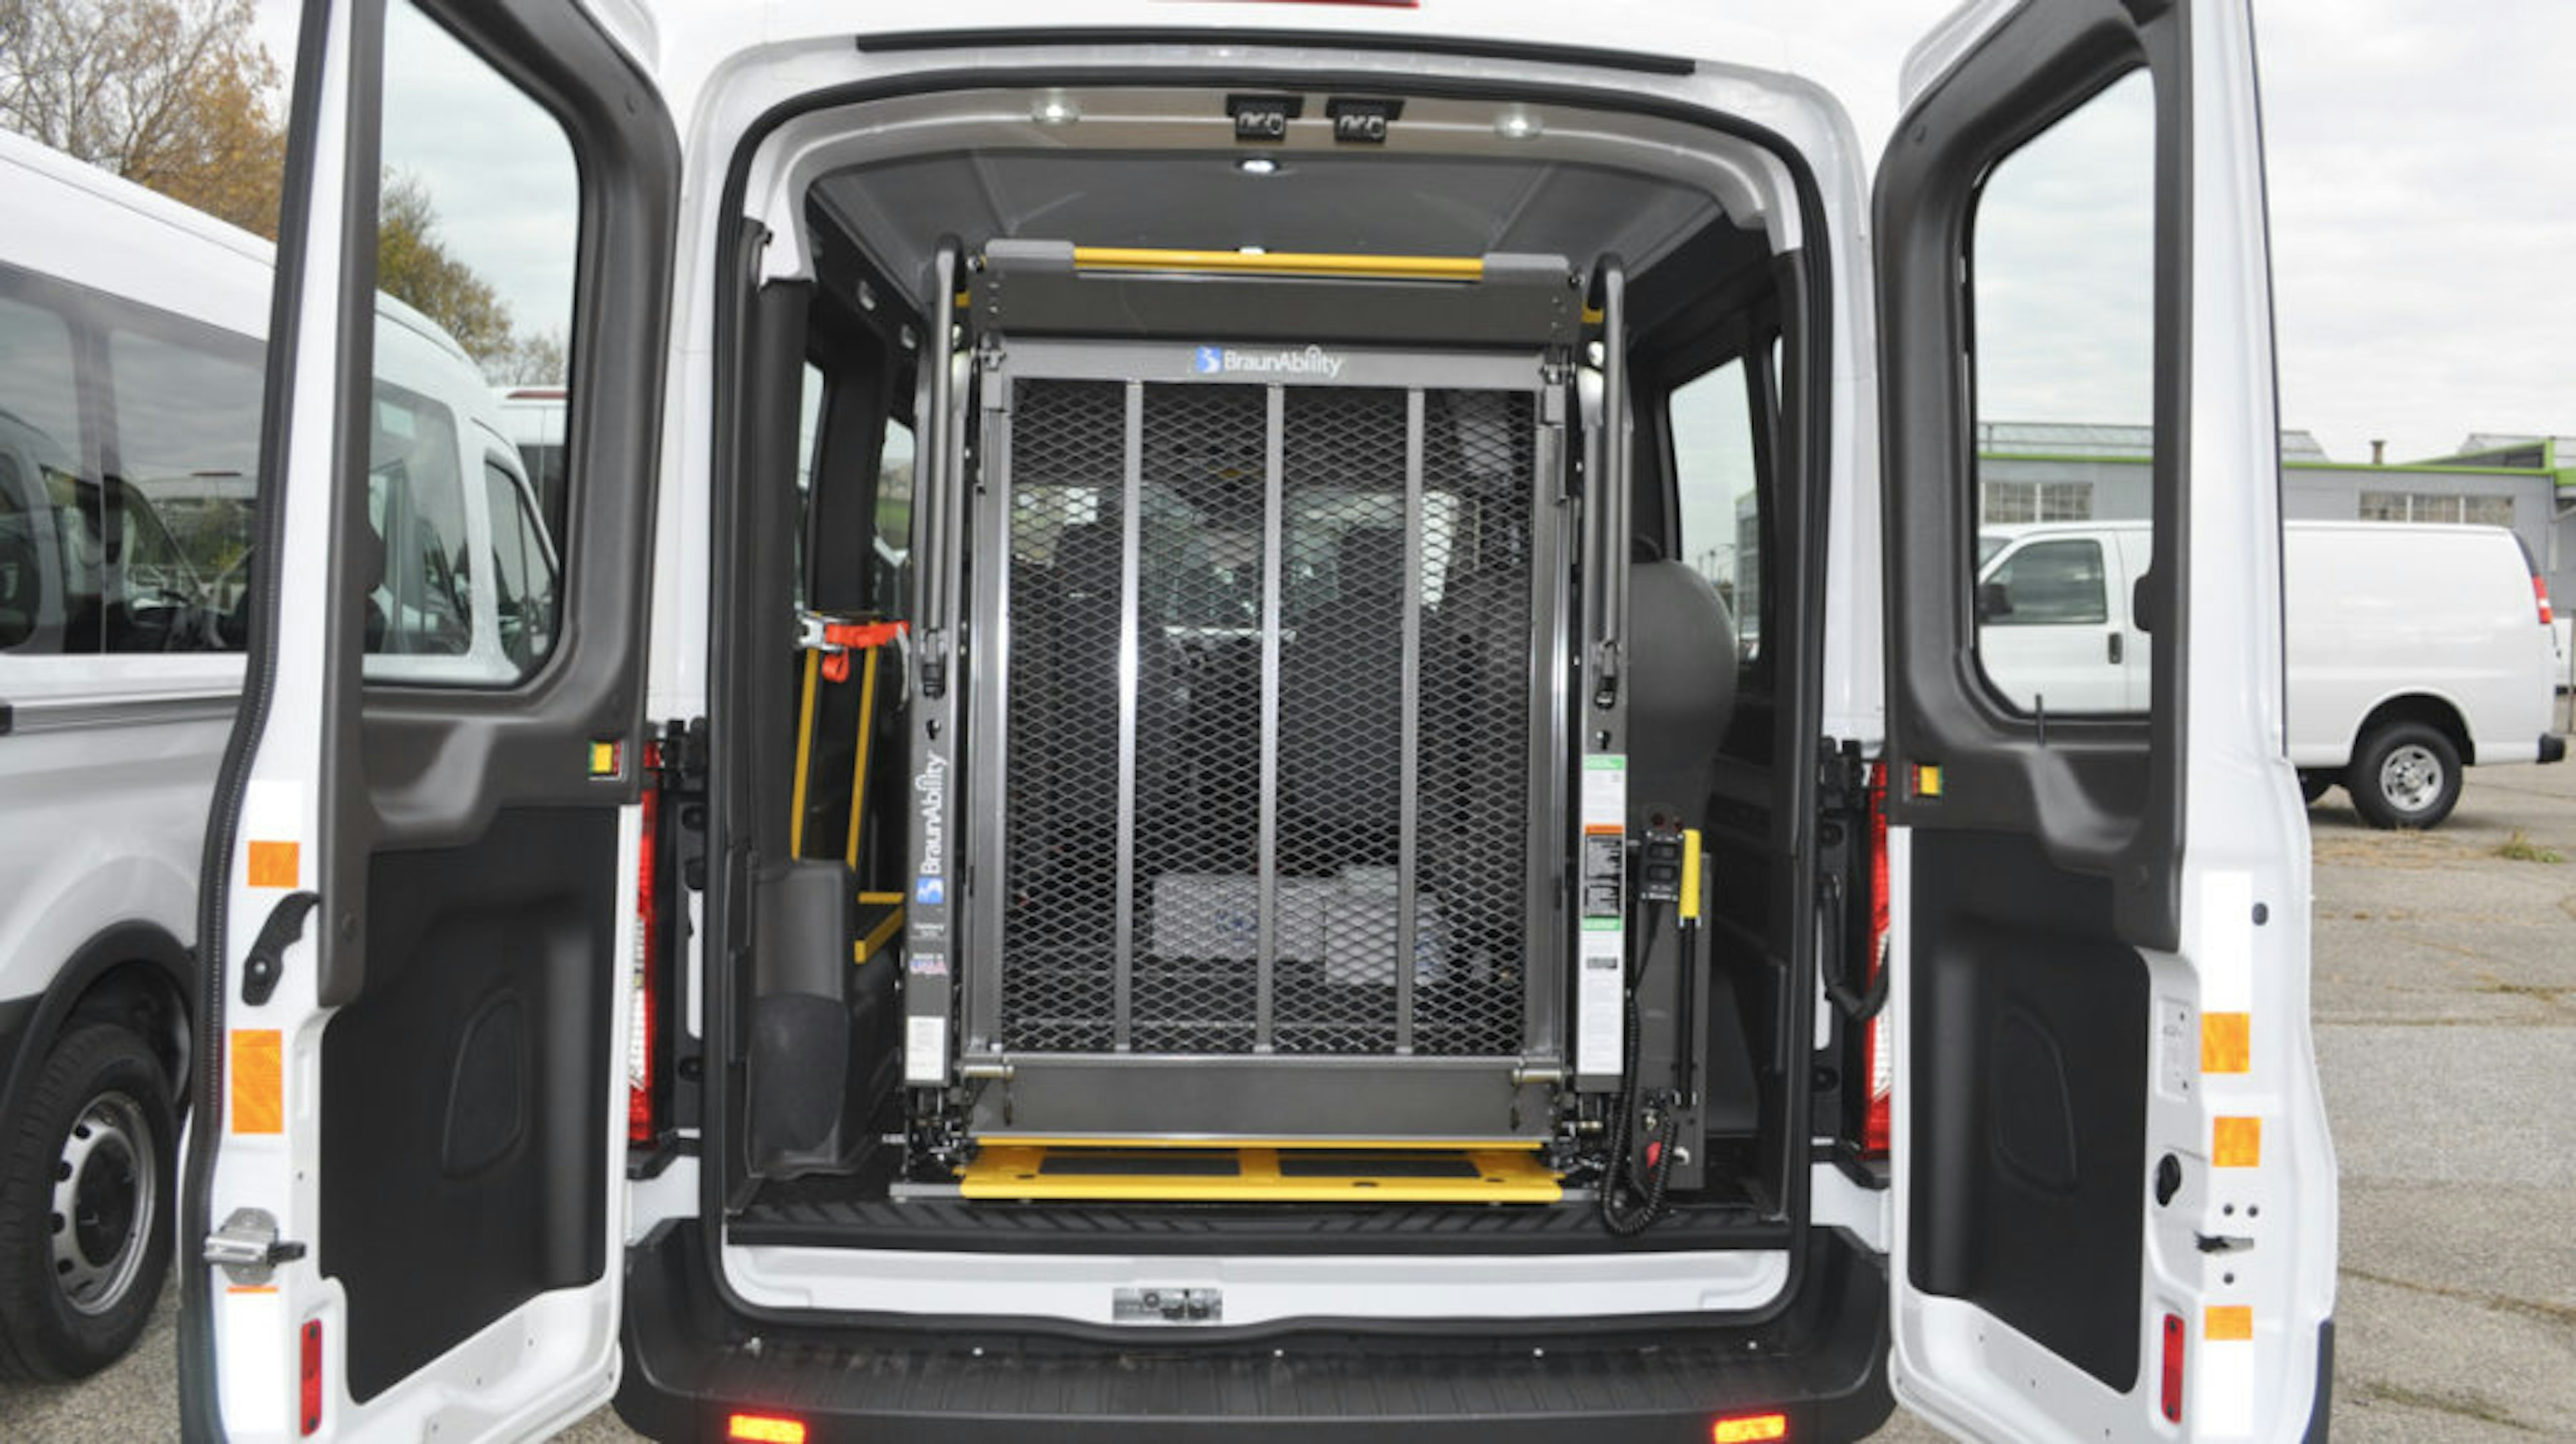 Mobility full-size van with rear lift